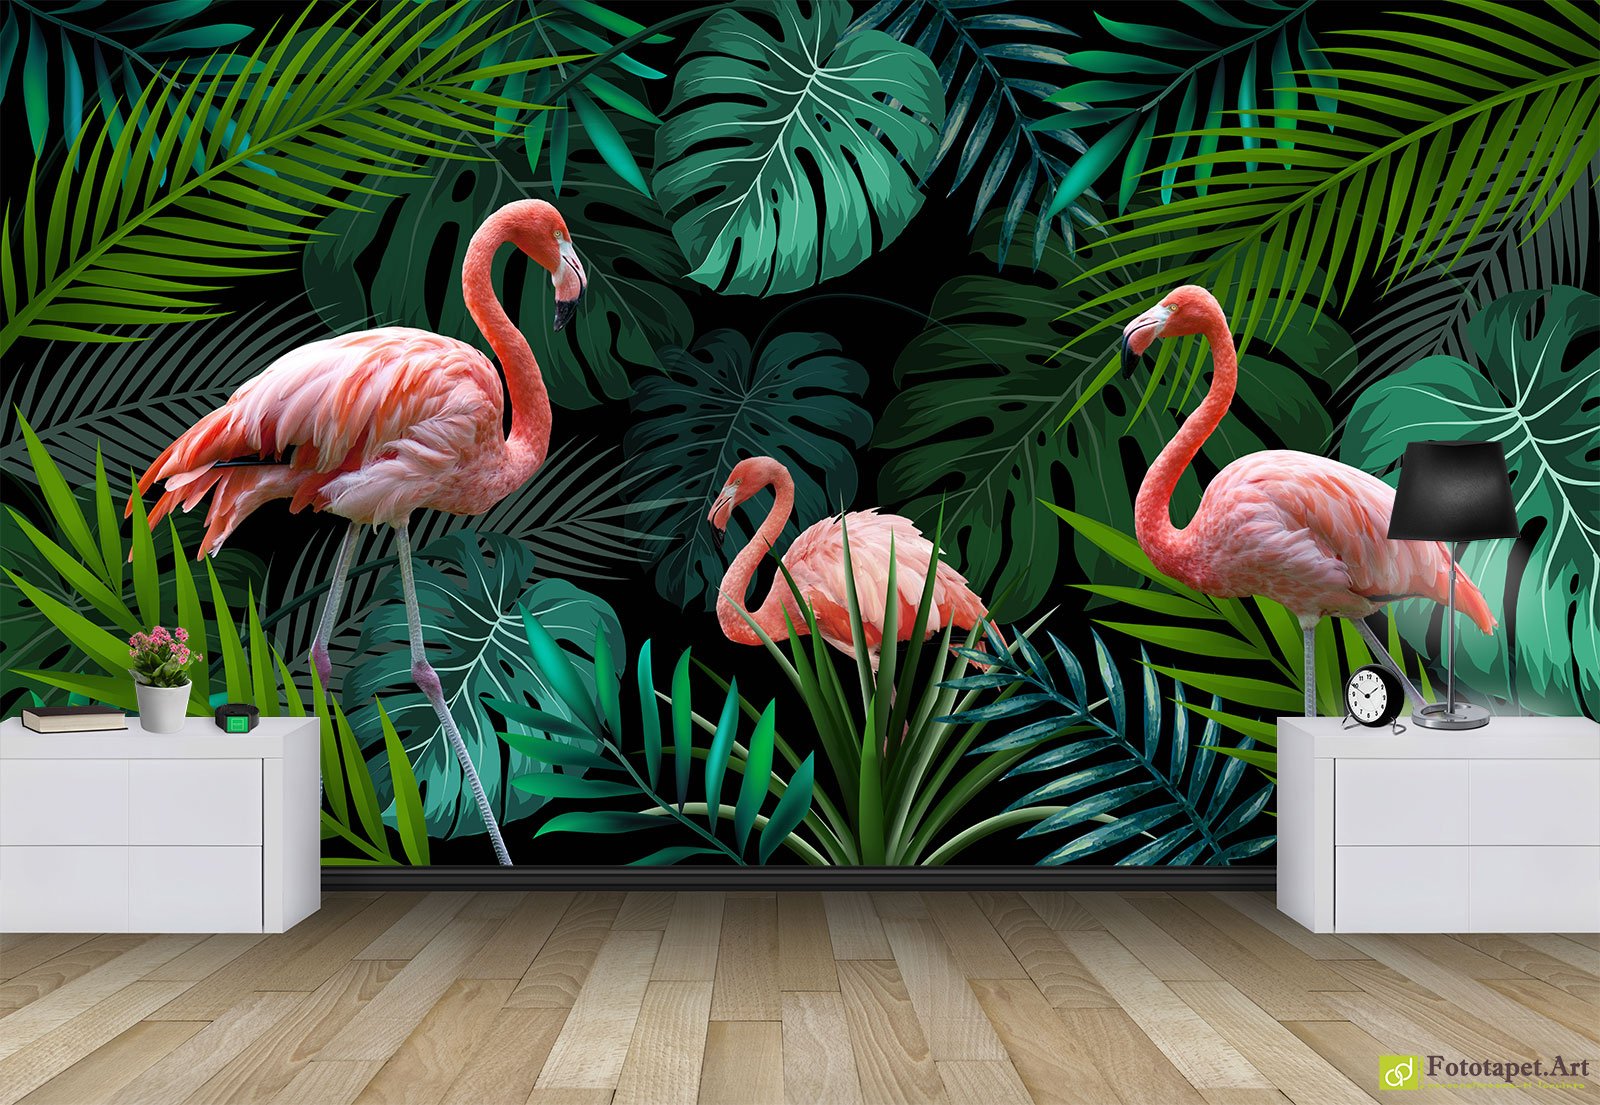 Photo wallpaper & Wall Murals - Flamingo and green leaves   Extraordinary prints are prepared only in safe, odorless and 100%  eco-friendly HP Latex technology